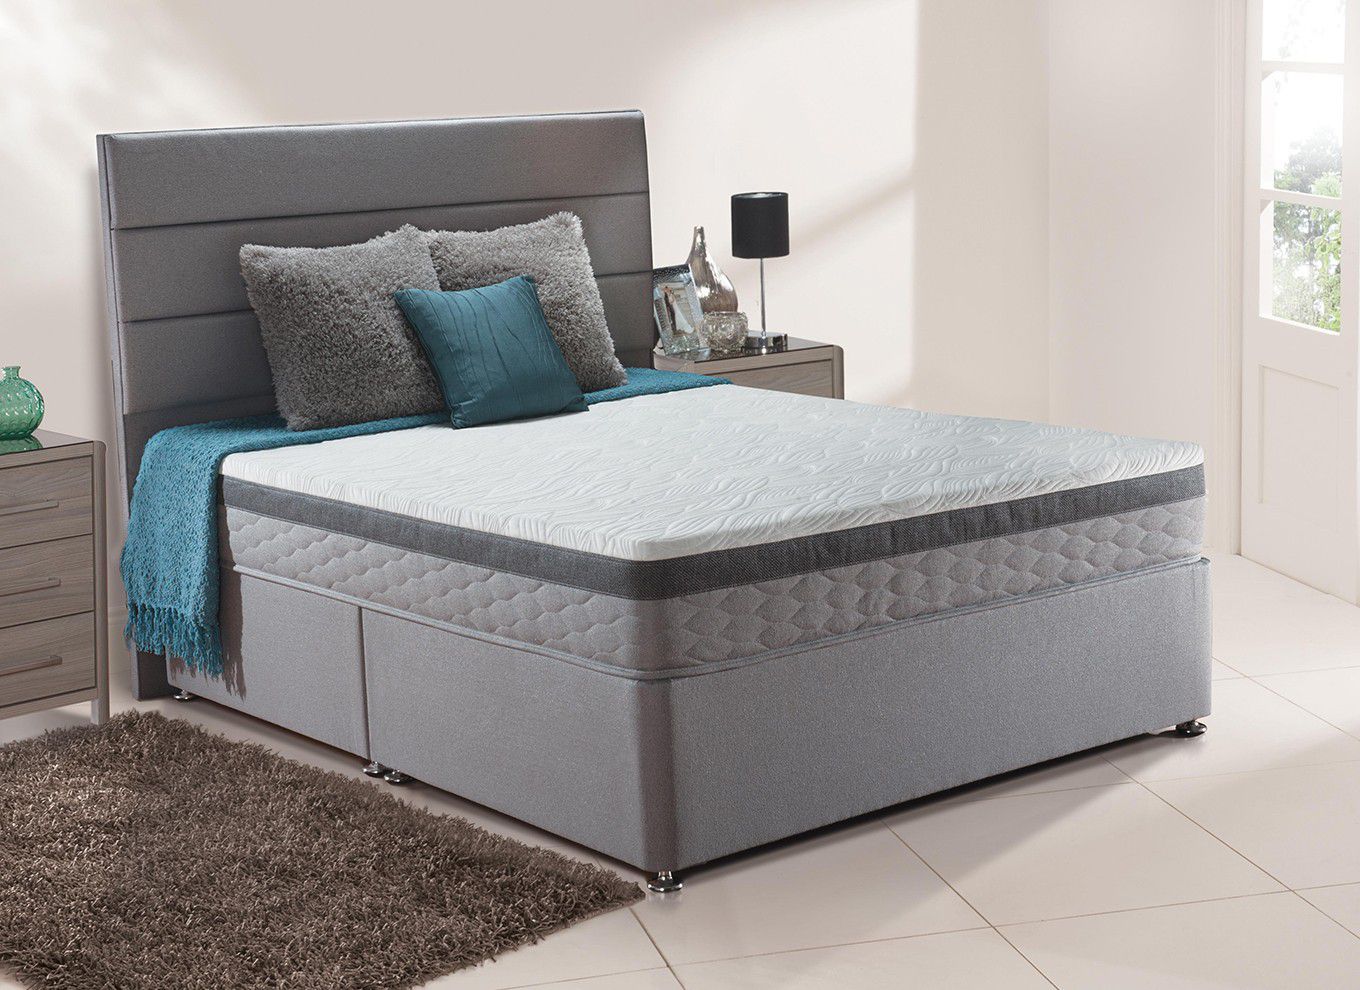 4`6 Double Sealy Ambience Posturepedic Spring Divan Bed -